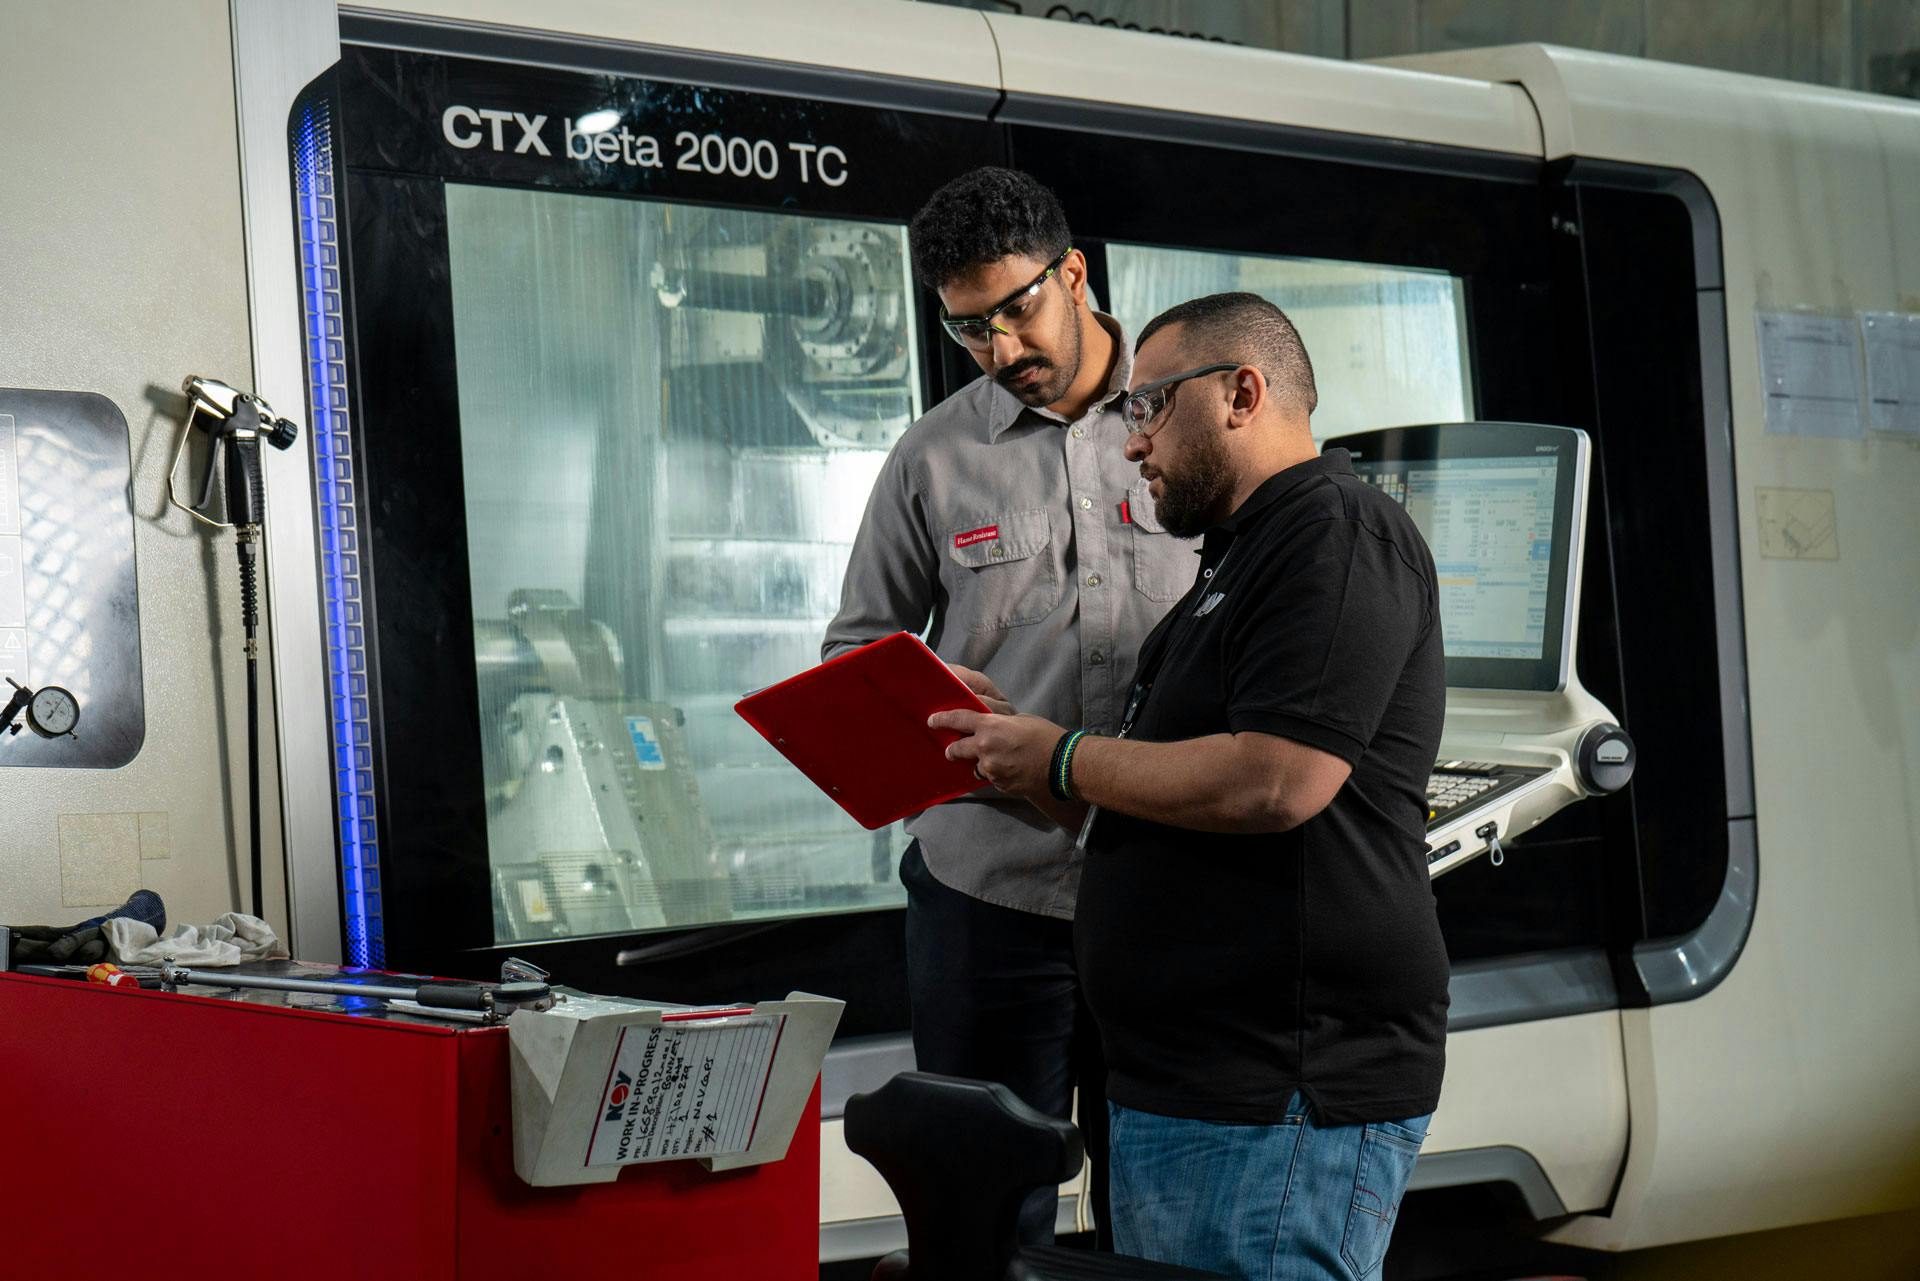 Two NOV employees reviewing information in front of a CTX beta 2000 TC, at the Dammam Chokes Manufacturing Plant